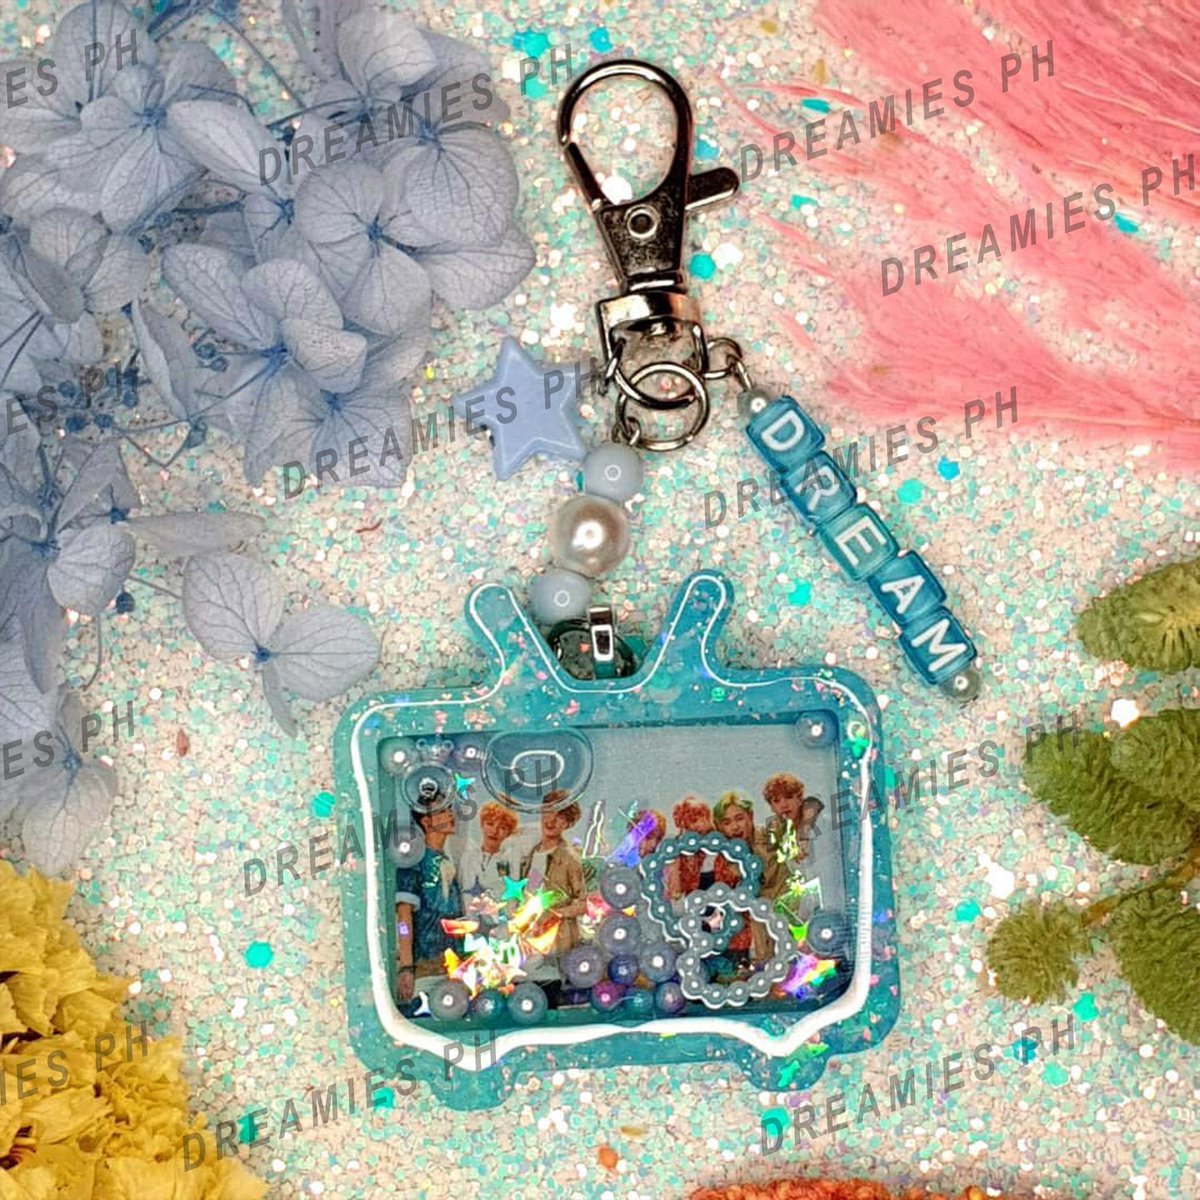  Dreamers! Here are actual previews of our DREAM Shaker Keyrings We are obsessed with these  Order form is still up! Check it out on the original tweet for the price and details. More previews to be posted soon! #NCTDREAM  #THEDREAMLAND  #4YearsWithNCTDREAM 